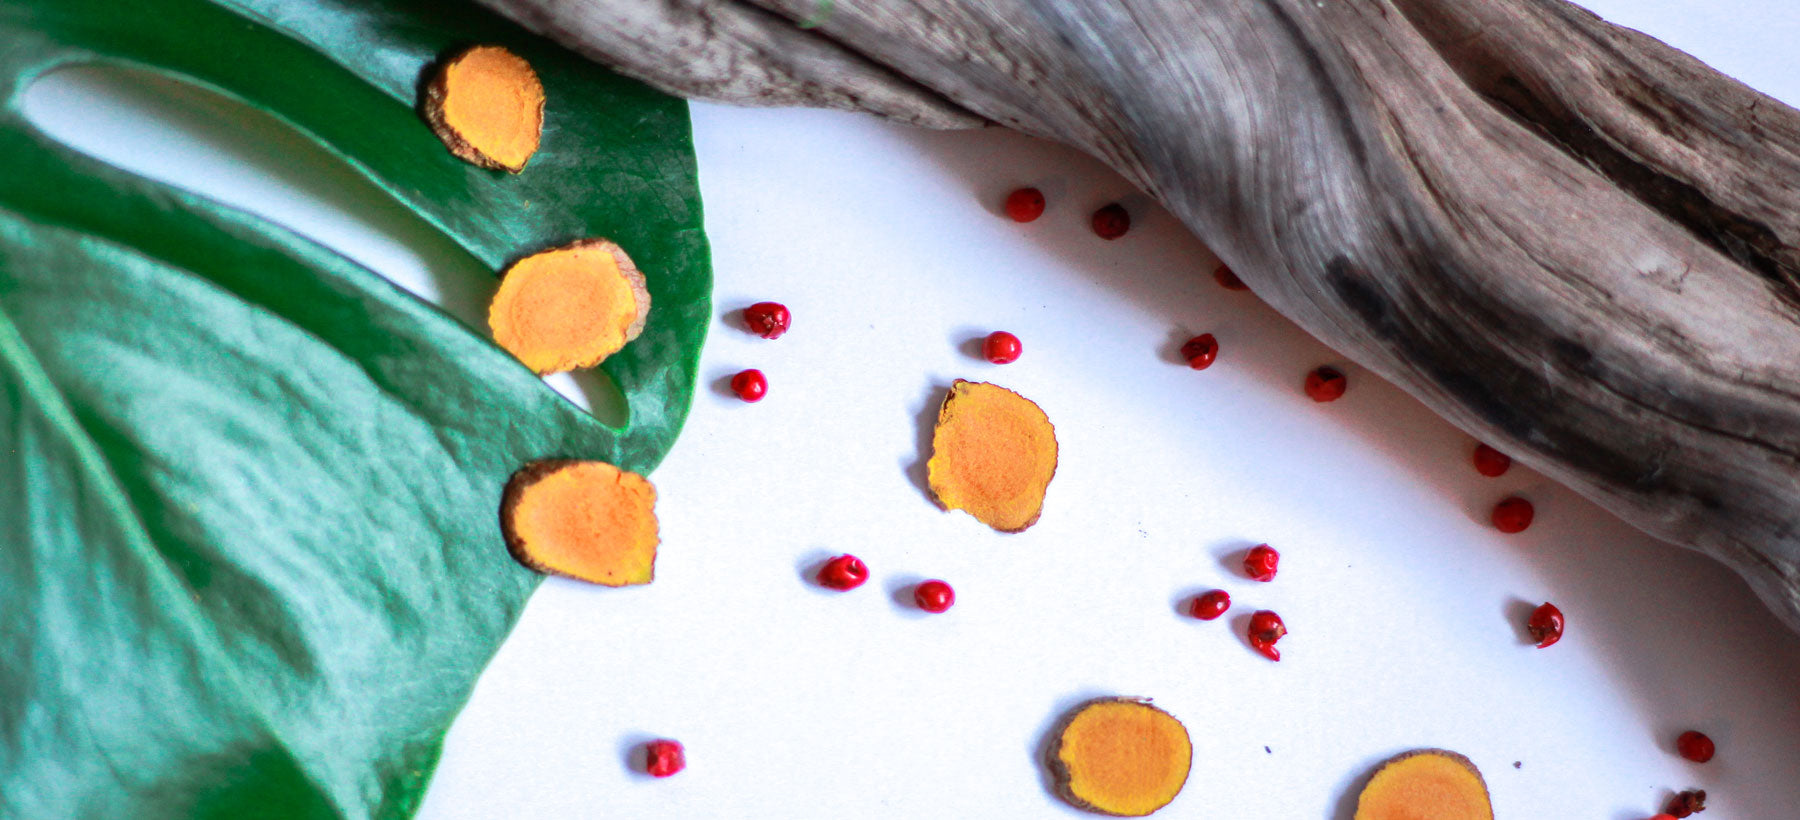 Turmeric slices and red seeds sprinkled next to a leaf and wooden branch